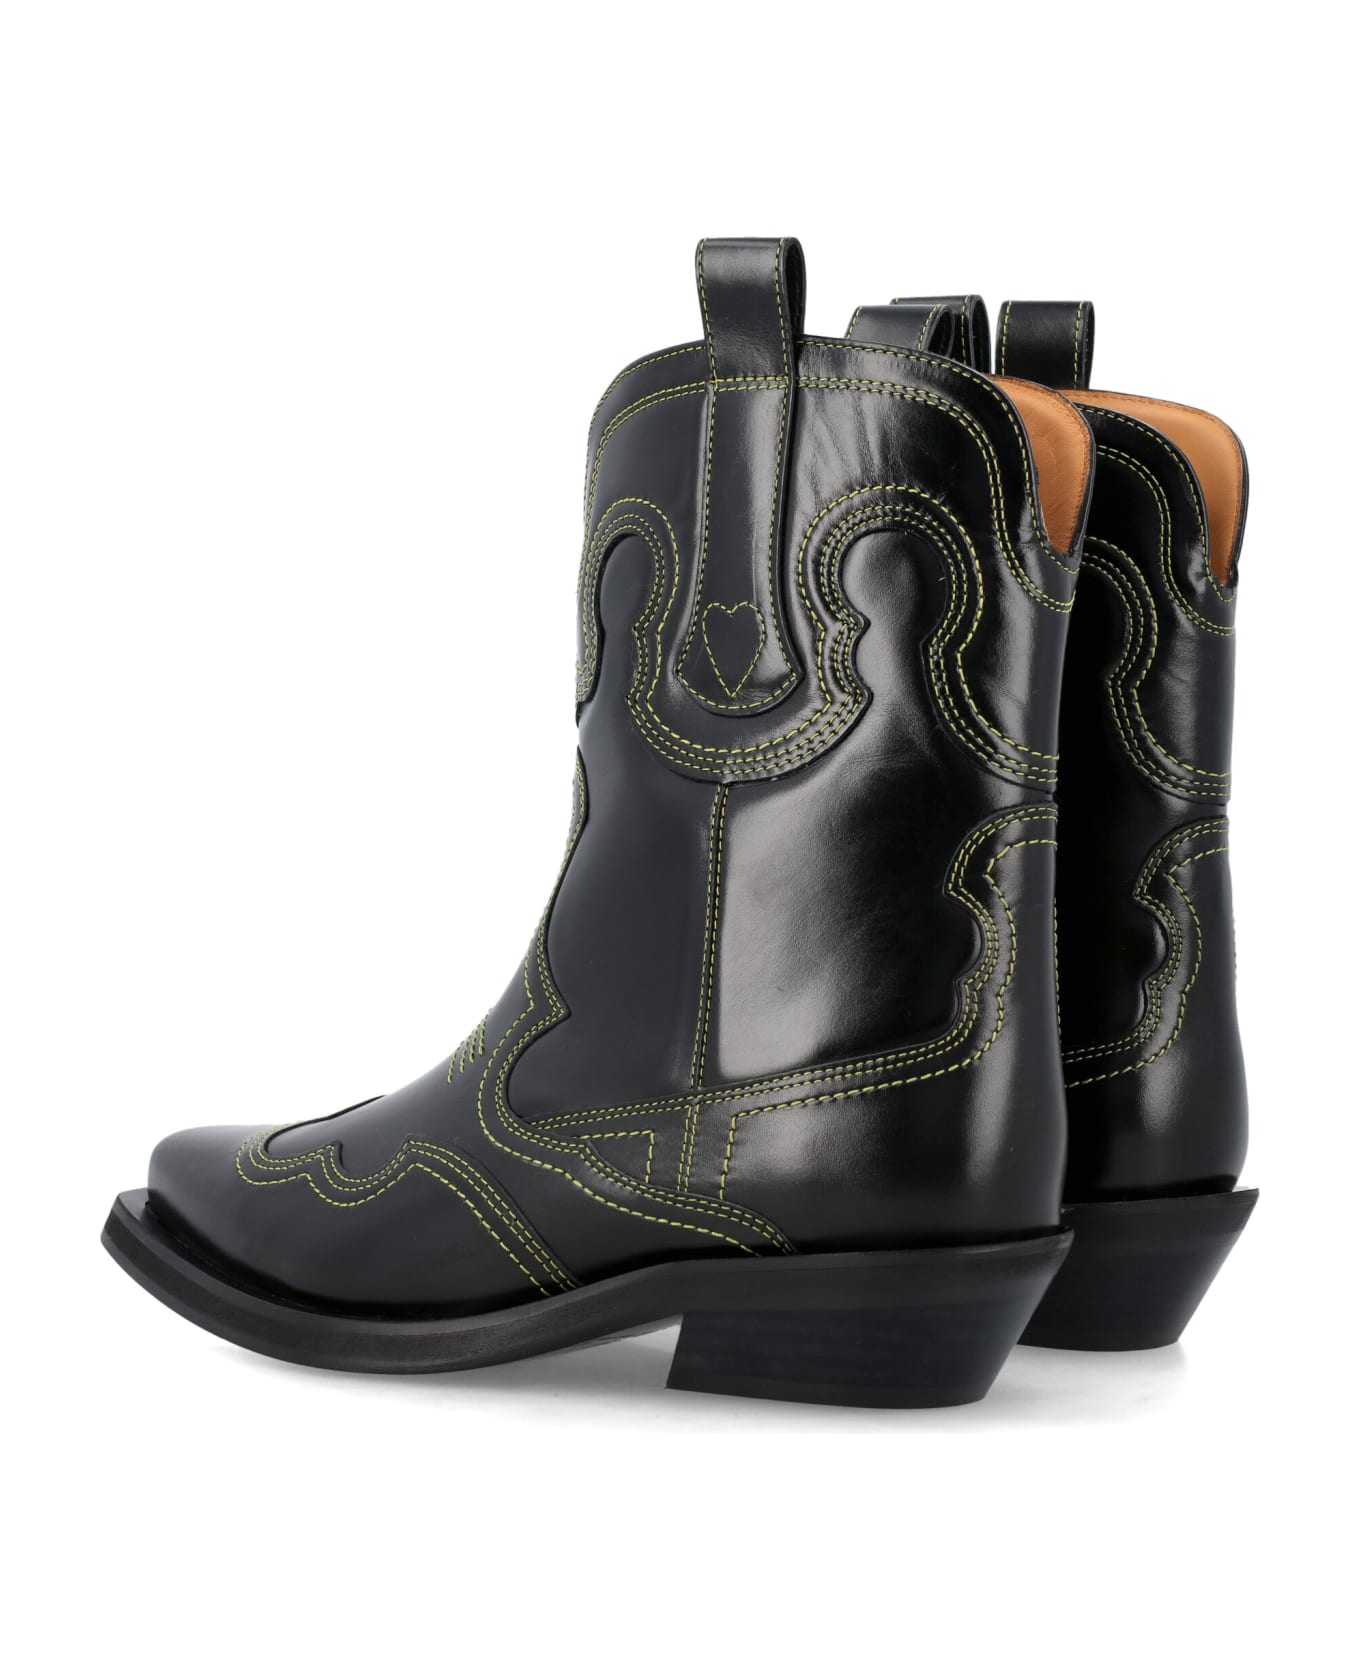 Ganni Embroidered Low Western Boots - BLACK YELLOW